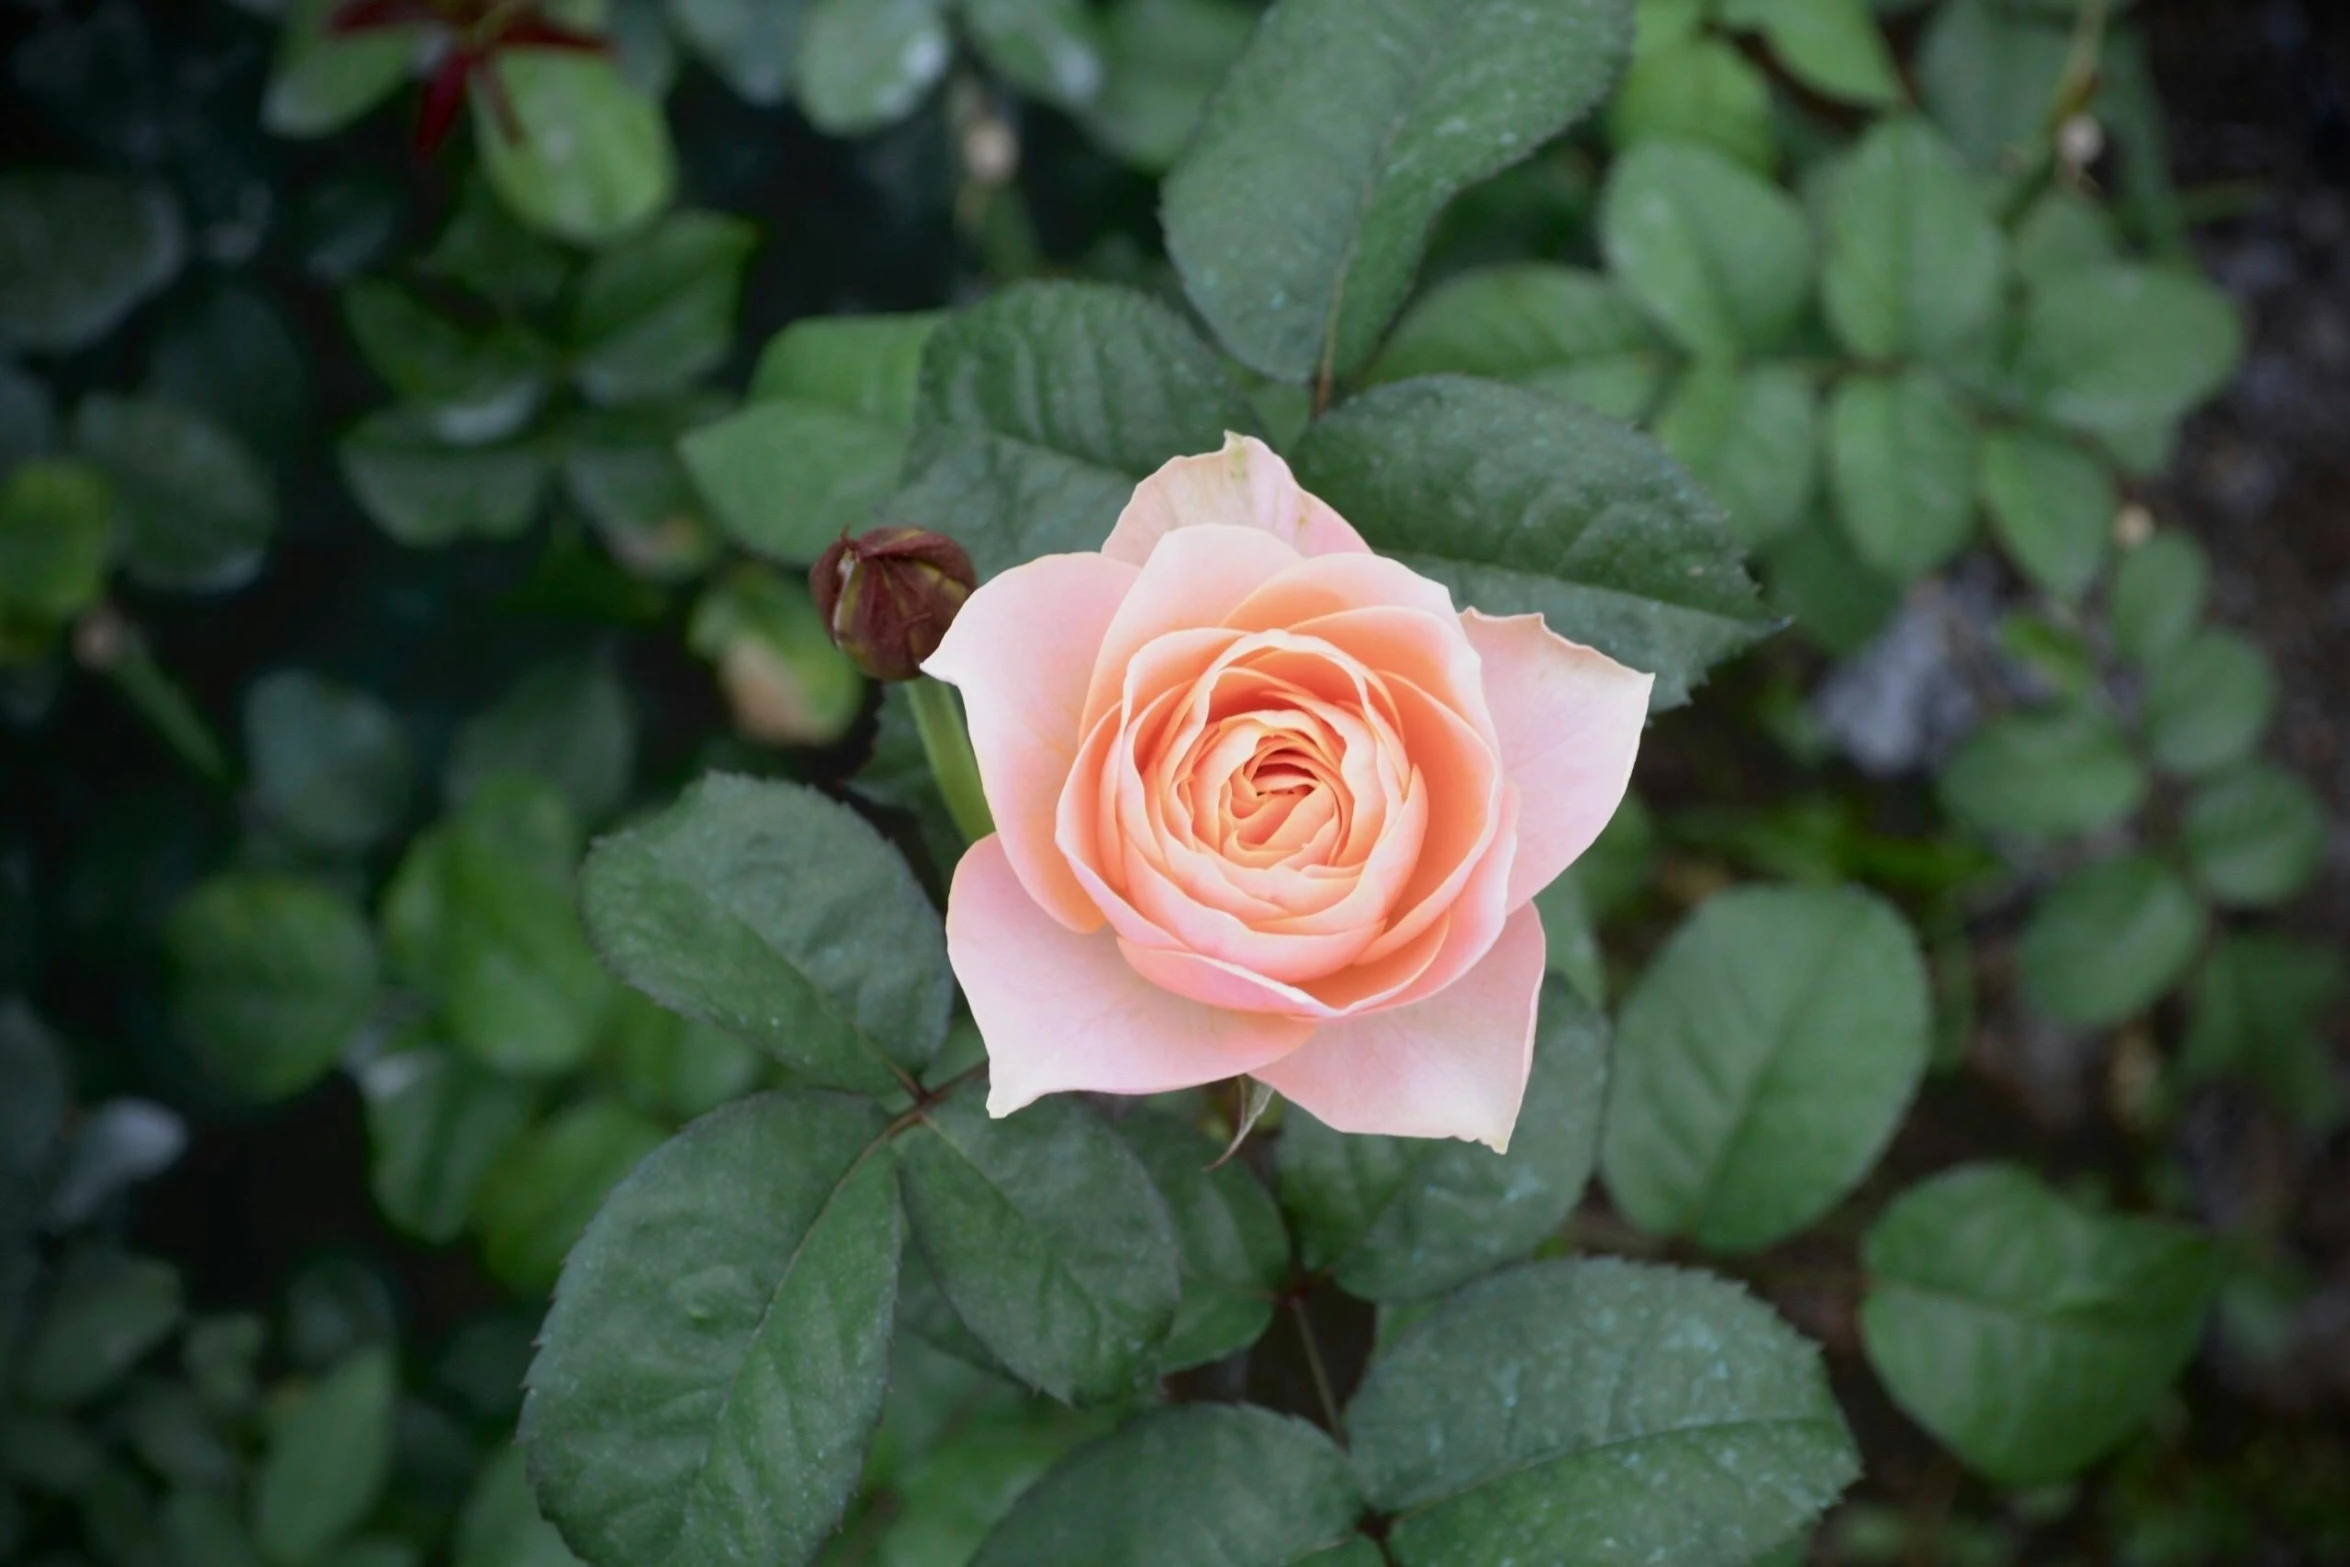 a close up of a pink rose with green leaves, unsplash, (light orange mist), in bloom greenhouse, single, grey